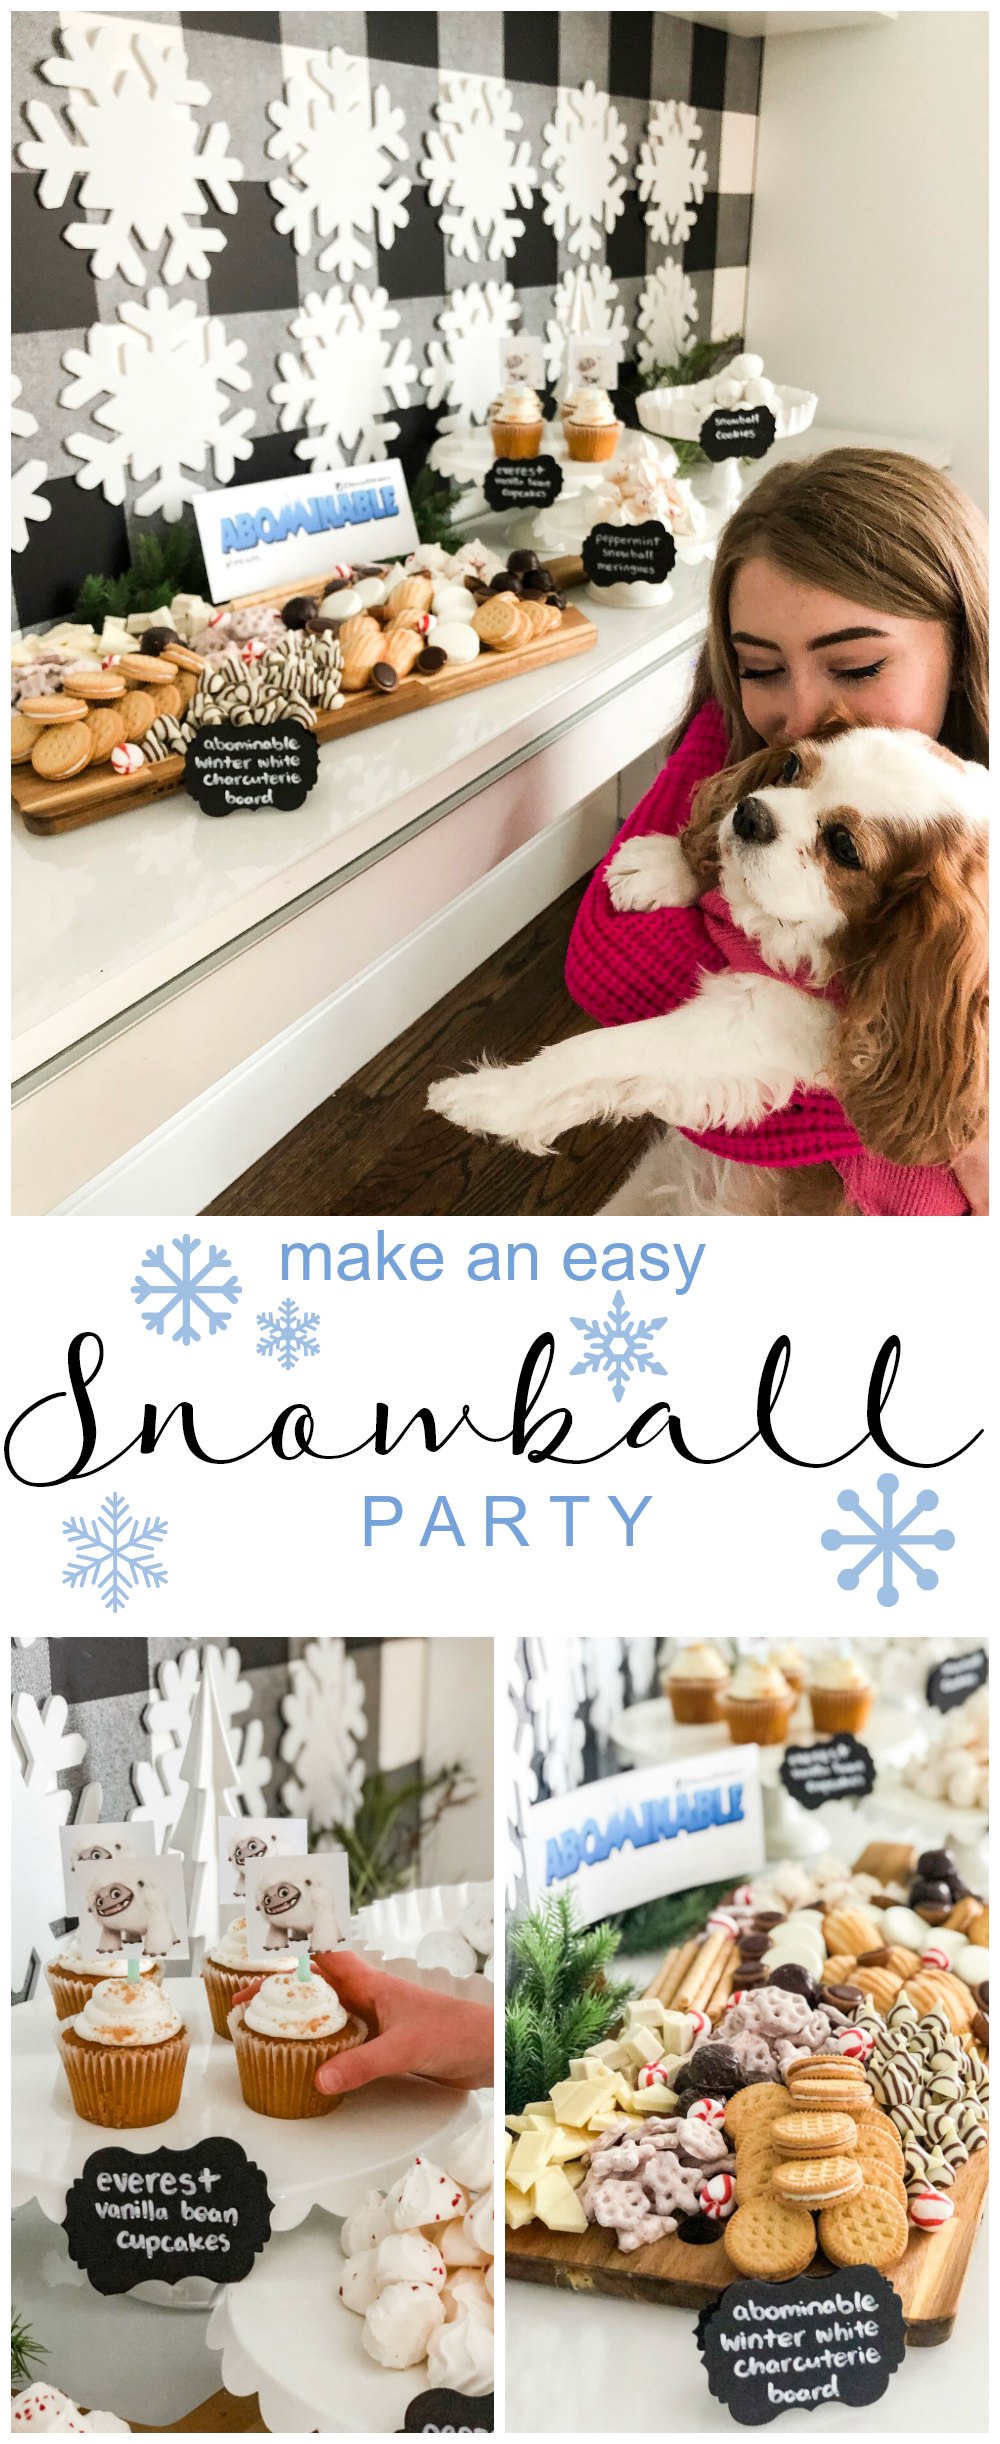 Plan a family movie night watching Abominable with an easy Snowball Party. Create an Abominable Charcuterie Dessert Board and Snowball Treats!